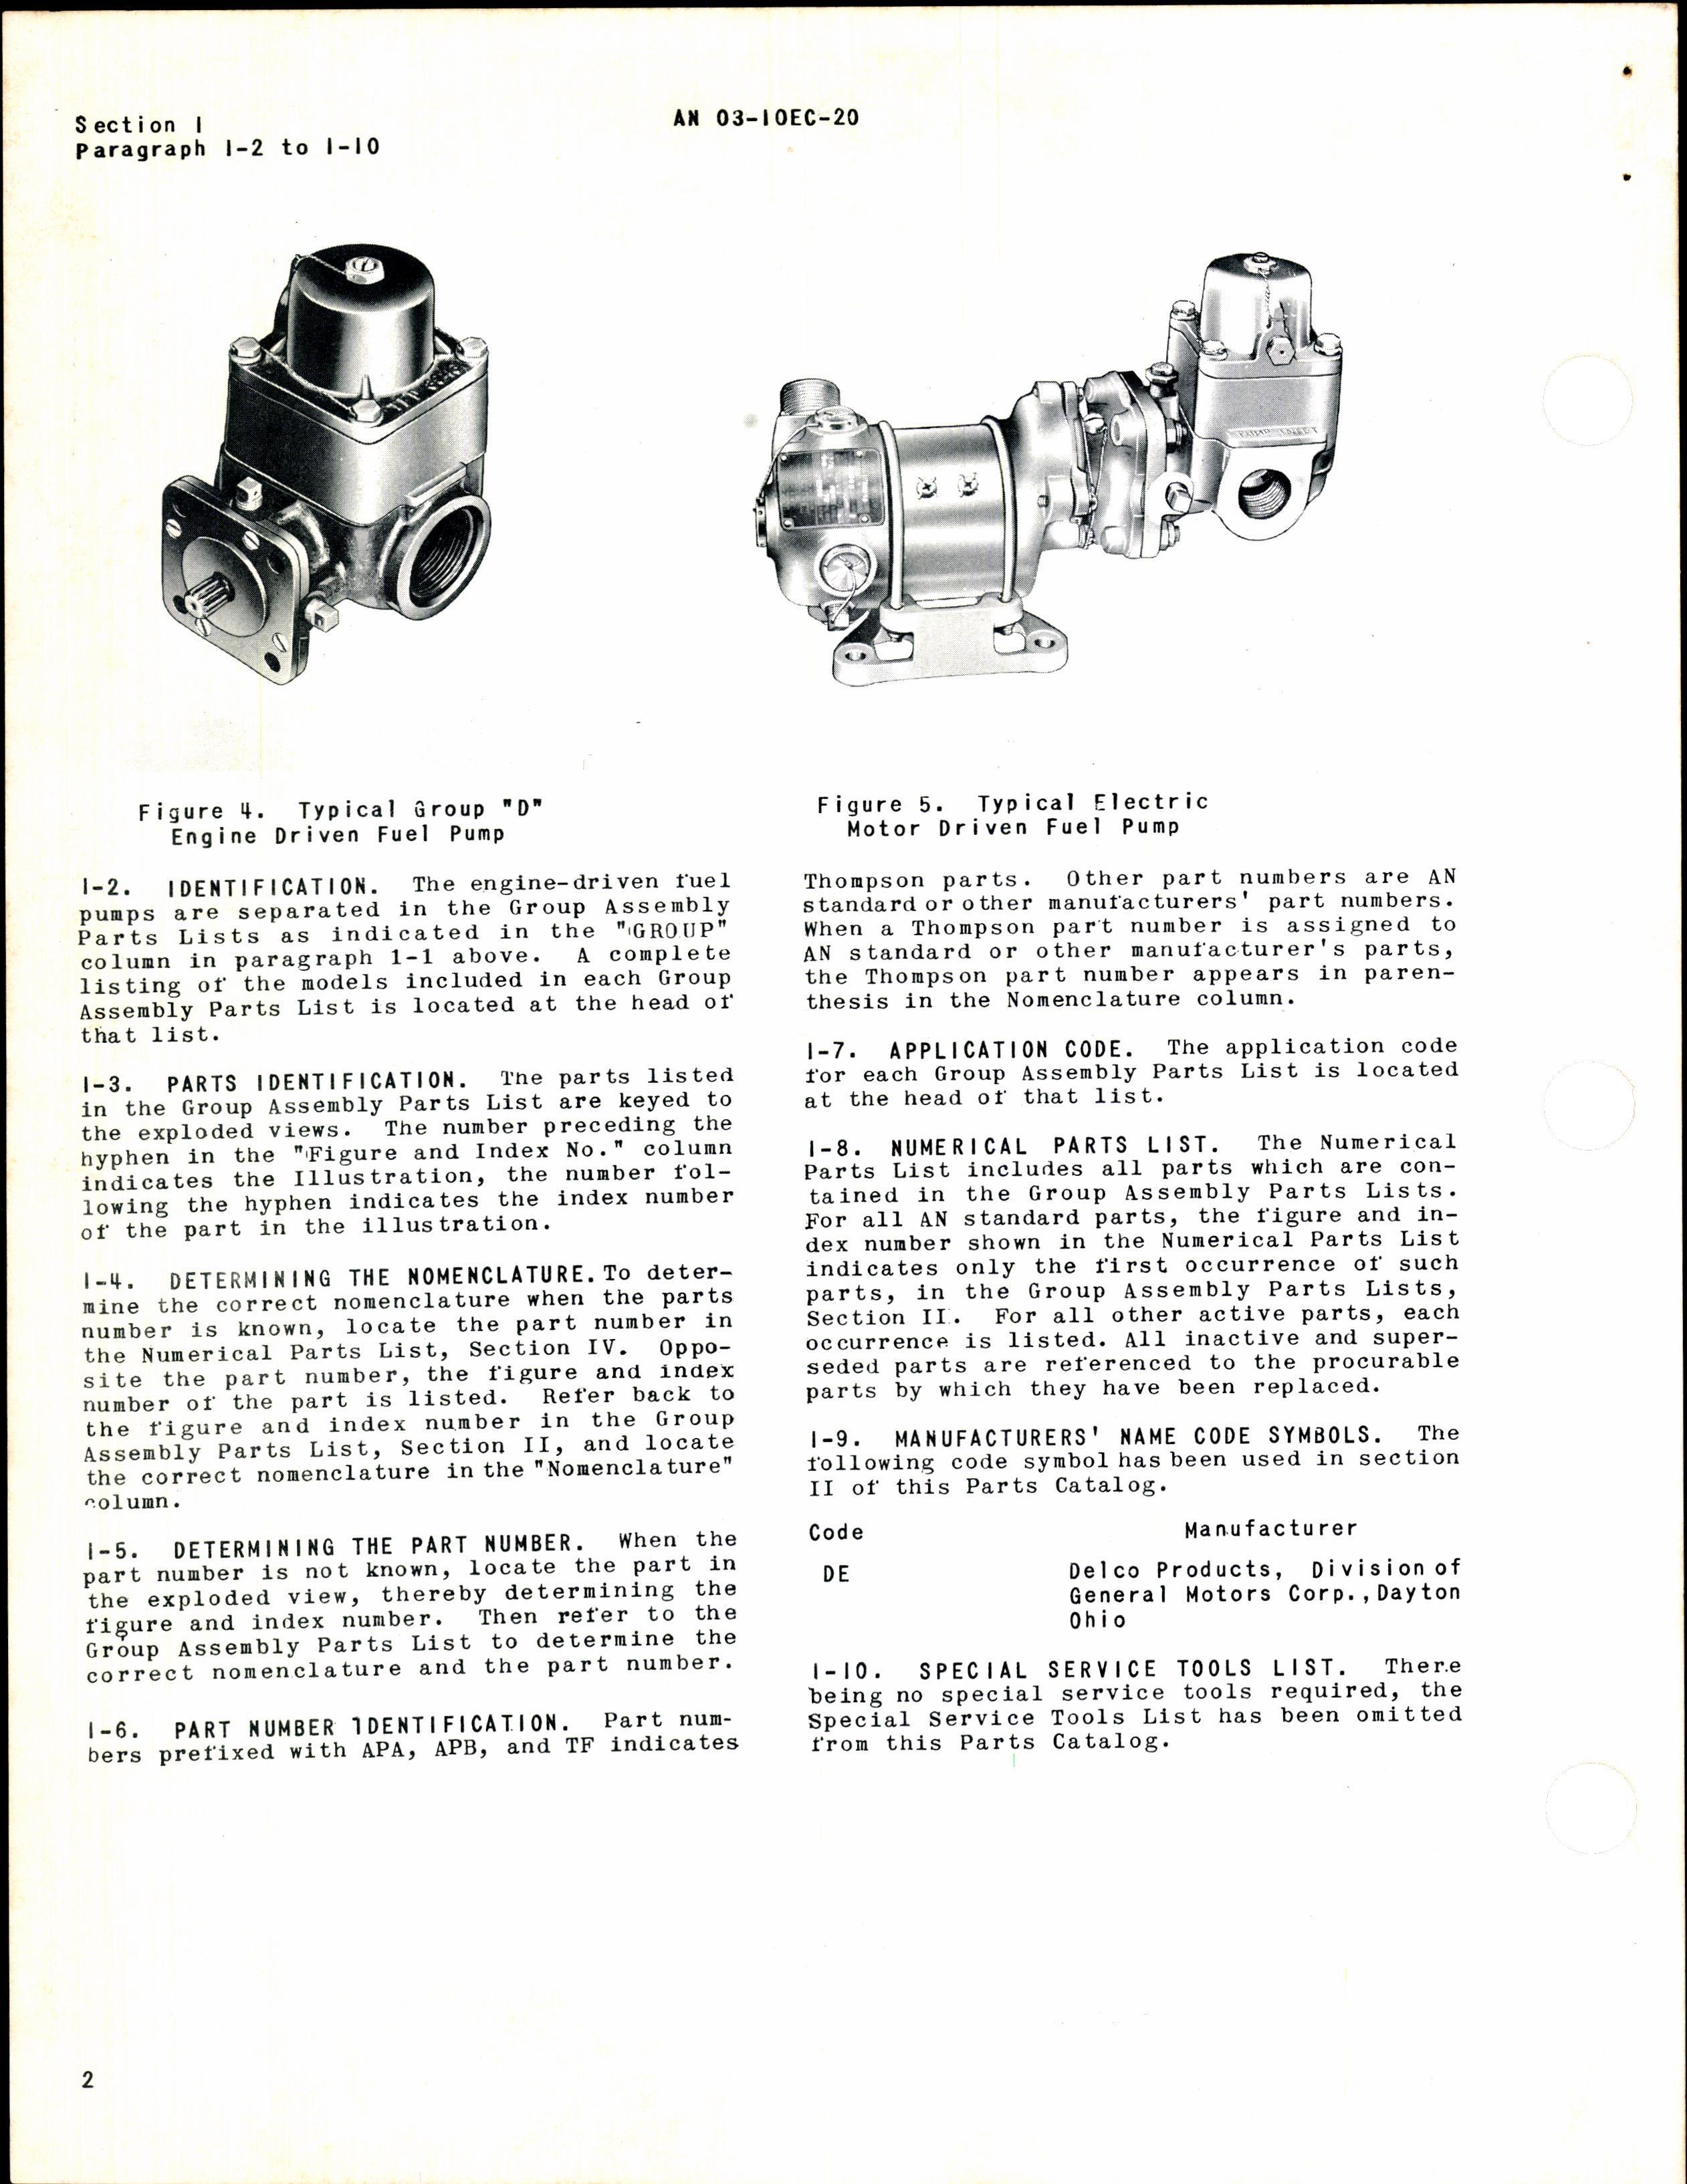 Sample page 4 from AirCorps Library document: Parts Catalog for Engine-Driven & Electric Motor Driven Thompson Fuel Pump